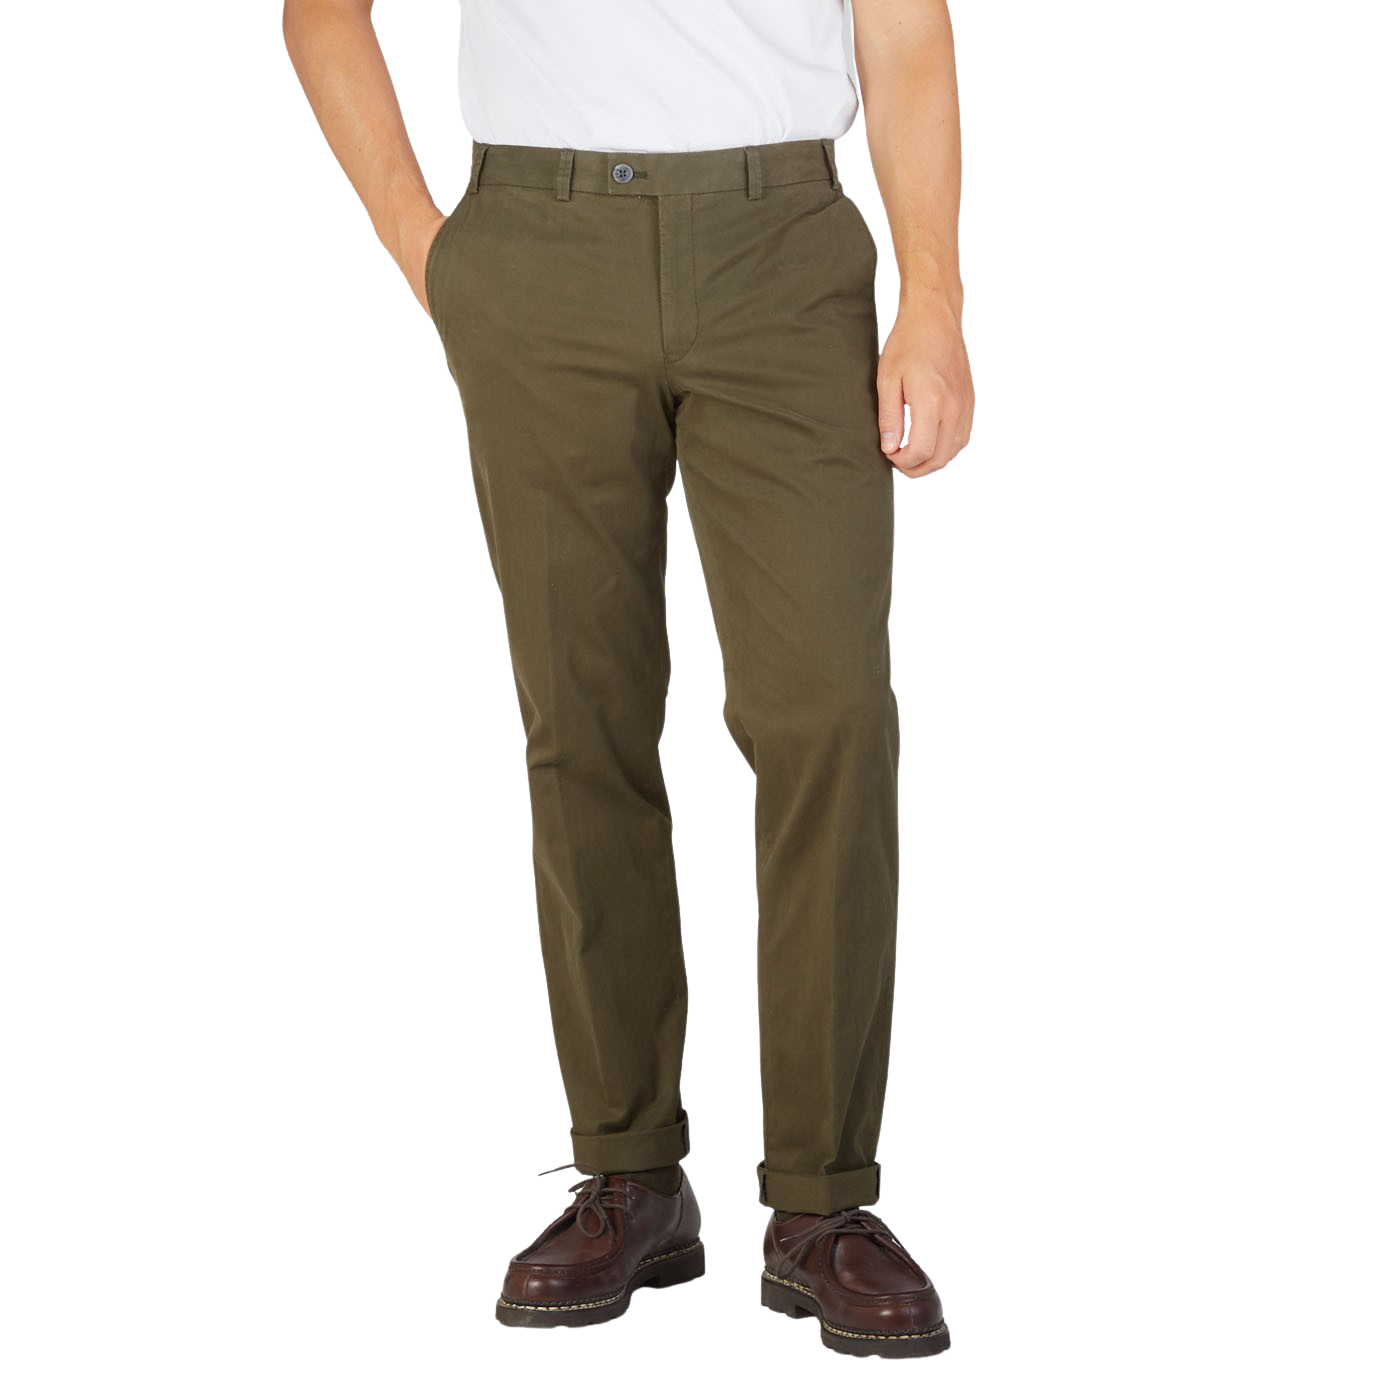 Men Cargo Pants || Men Cargo Pants Cotton Color Olive Green With Free  Shipping | eBay